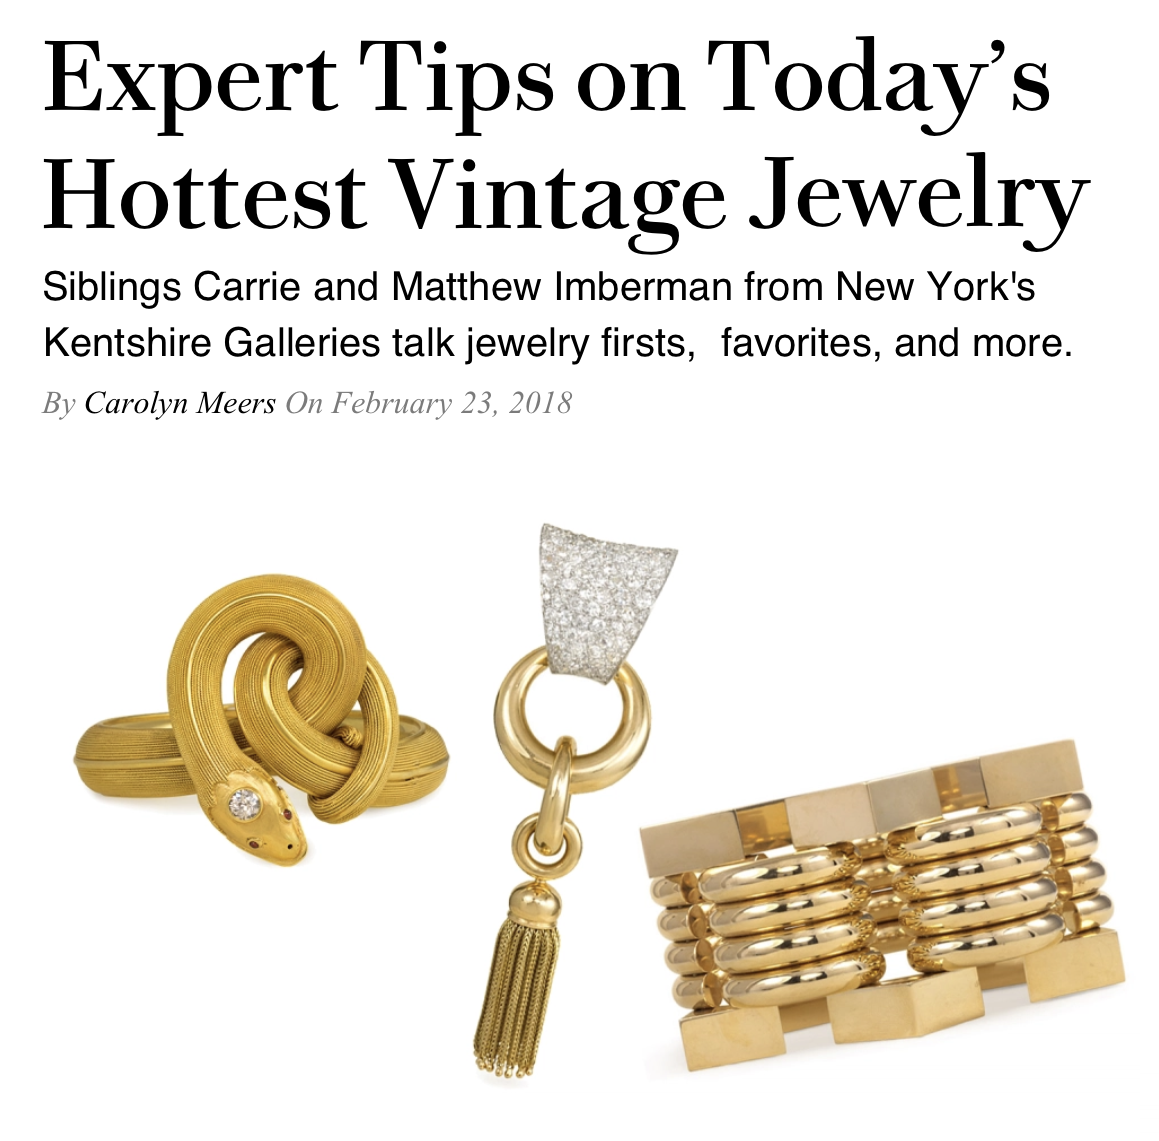 Kentshire's owners talk jewelry firsts and favorites with the Robb Report